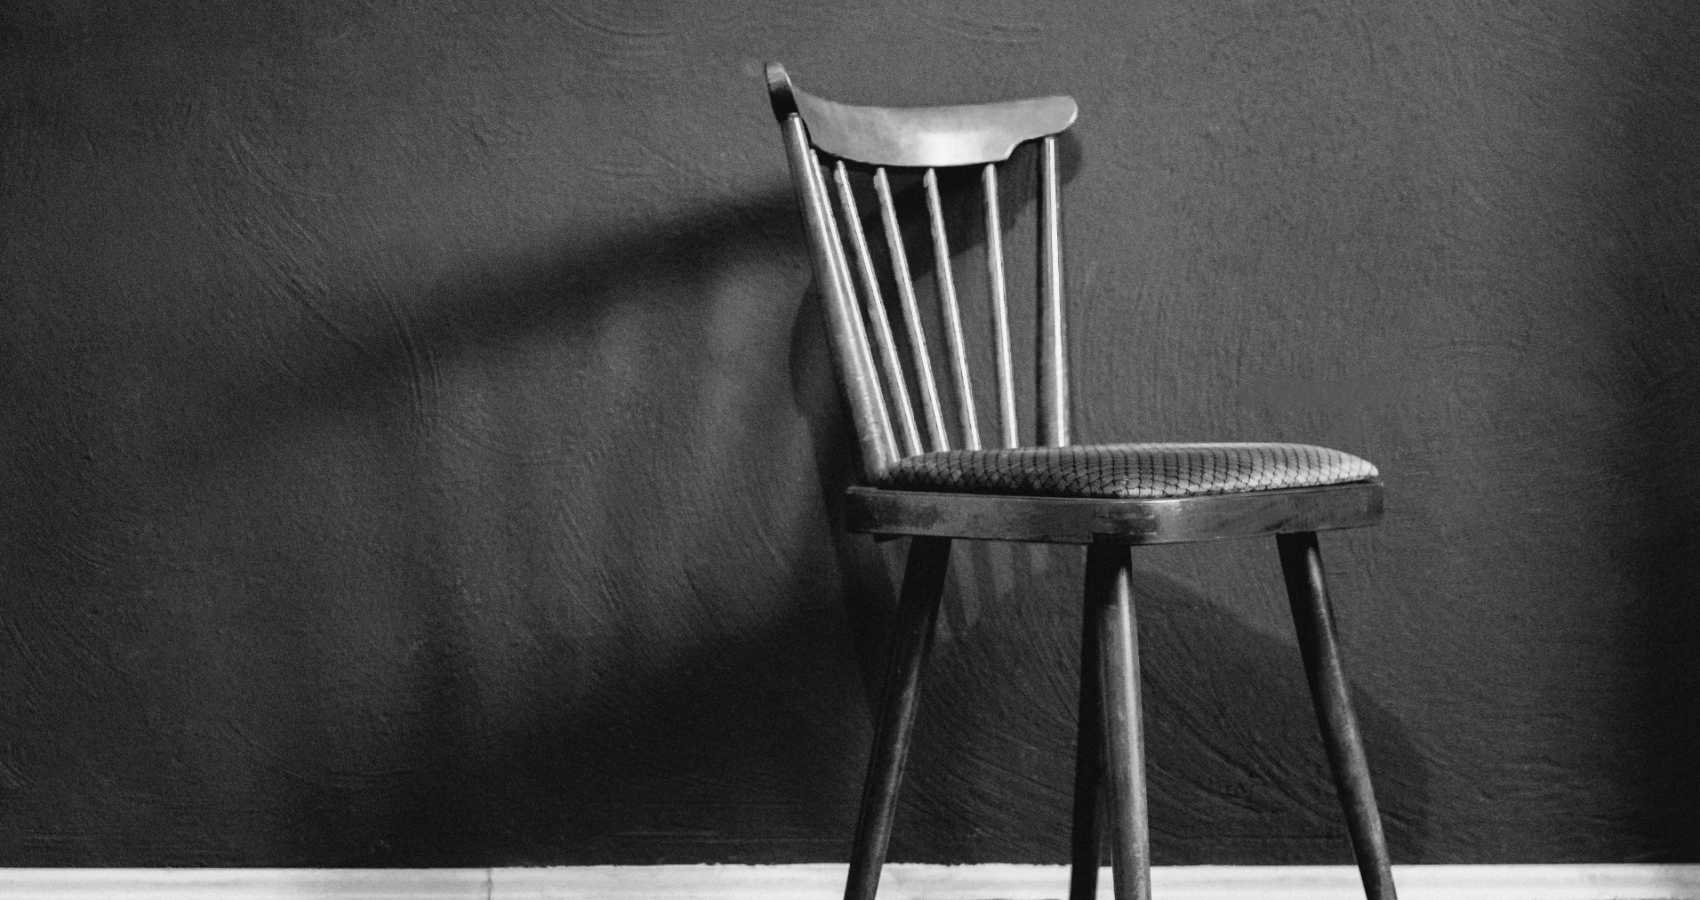 The Empty Chair, story by Niall Crowley at Spillwords.com